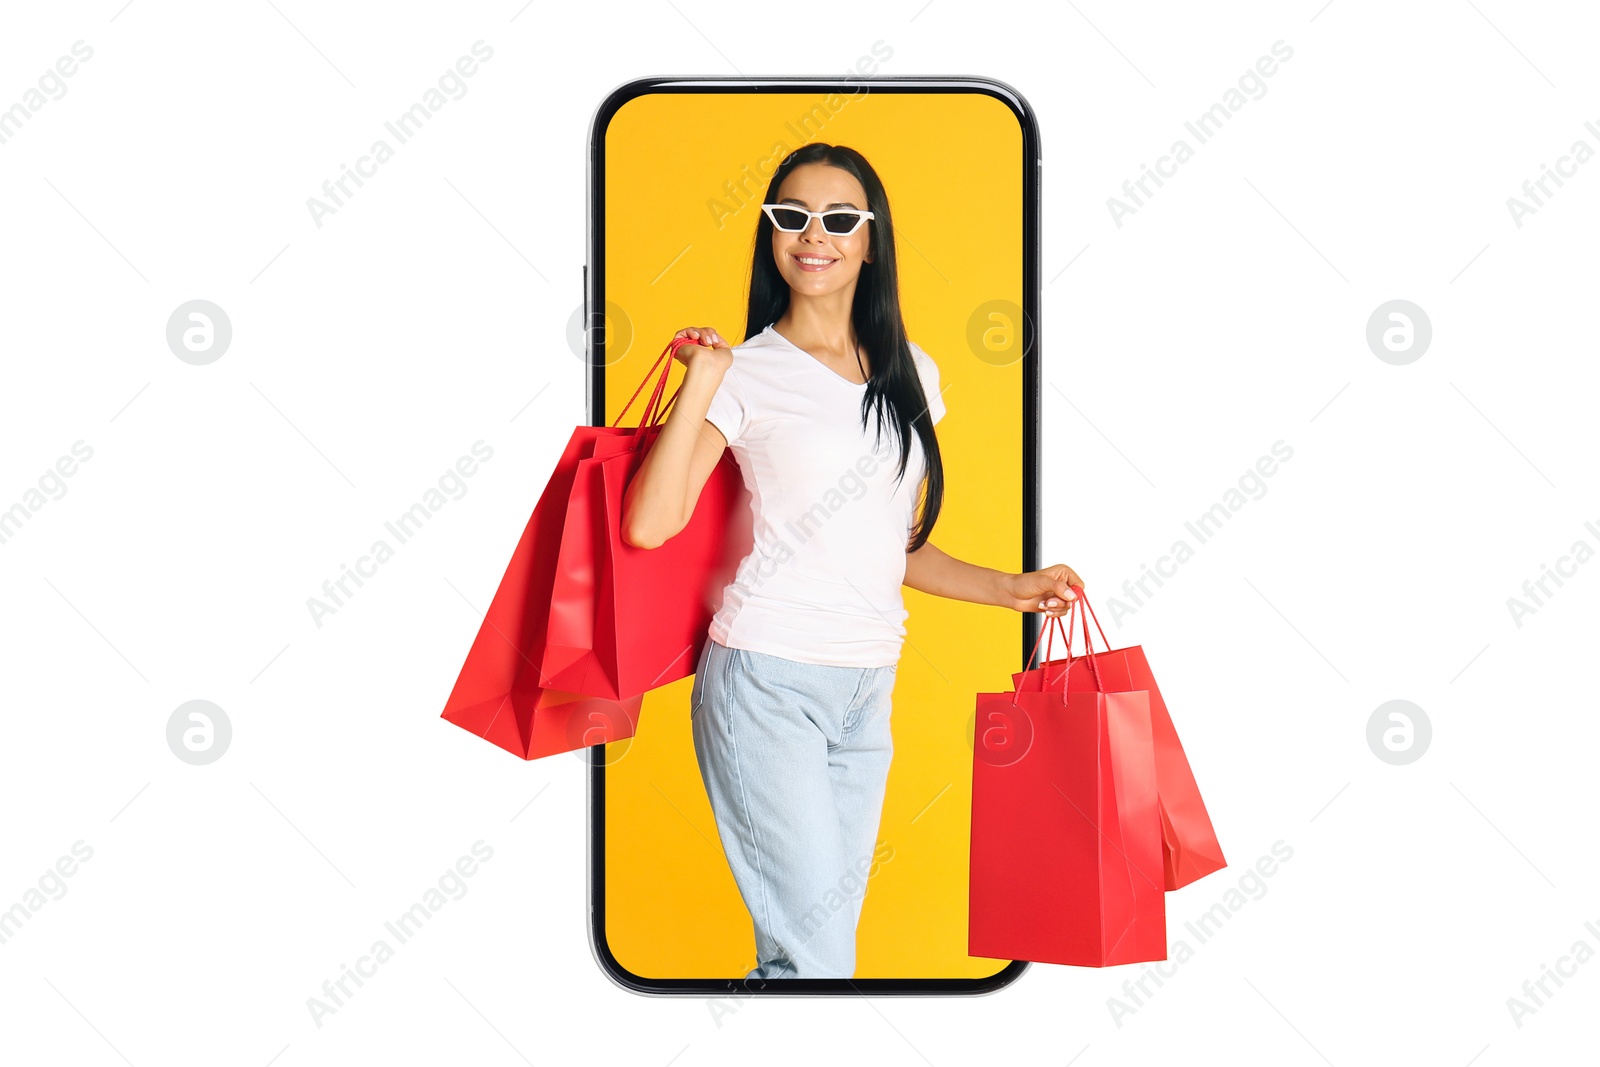 Image of Online shopping. Happy woman with paper bags looking out from smartphone on white background